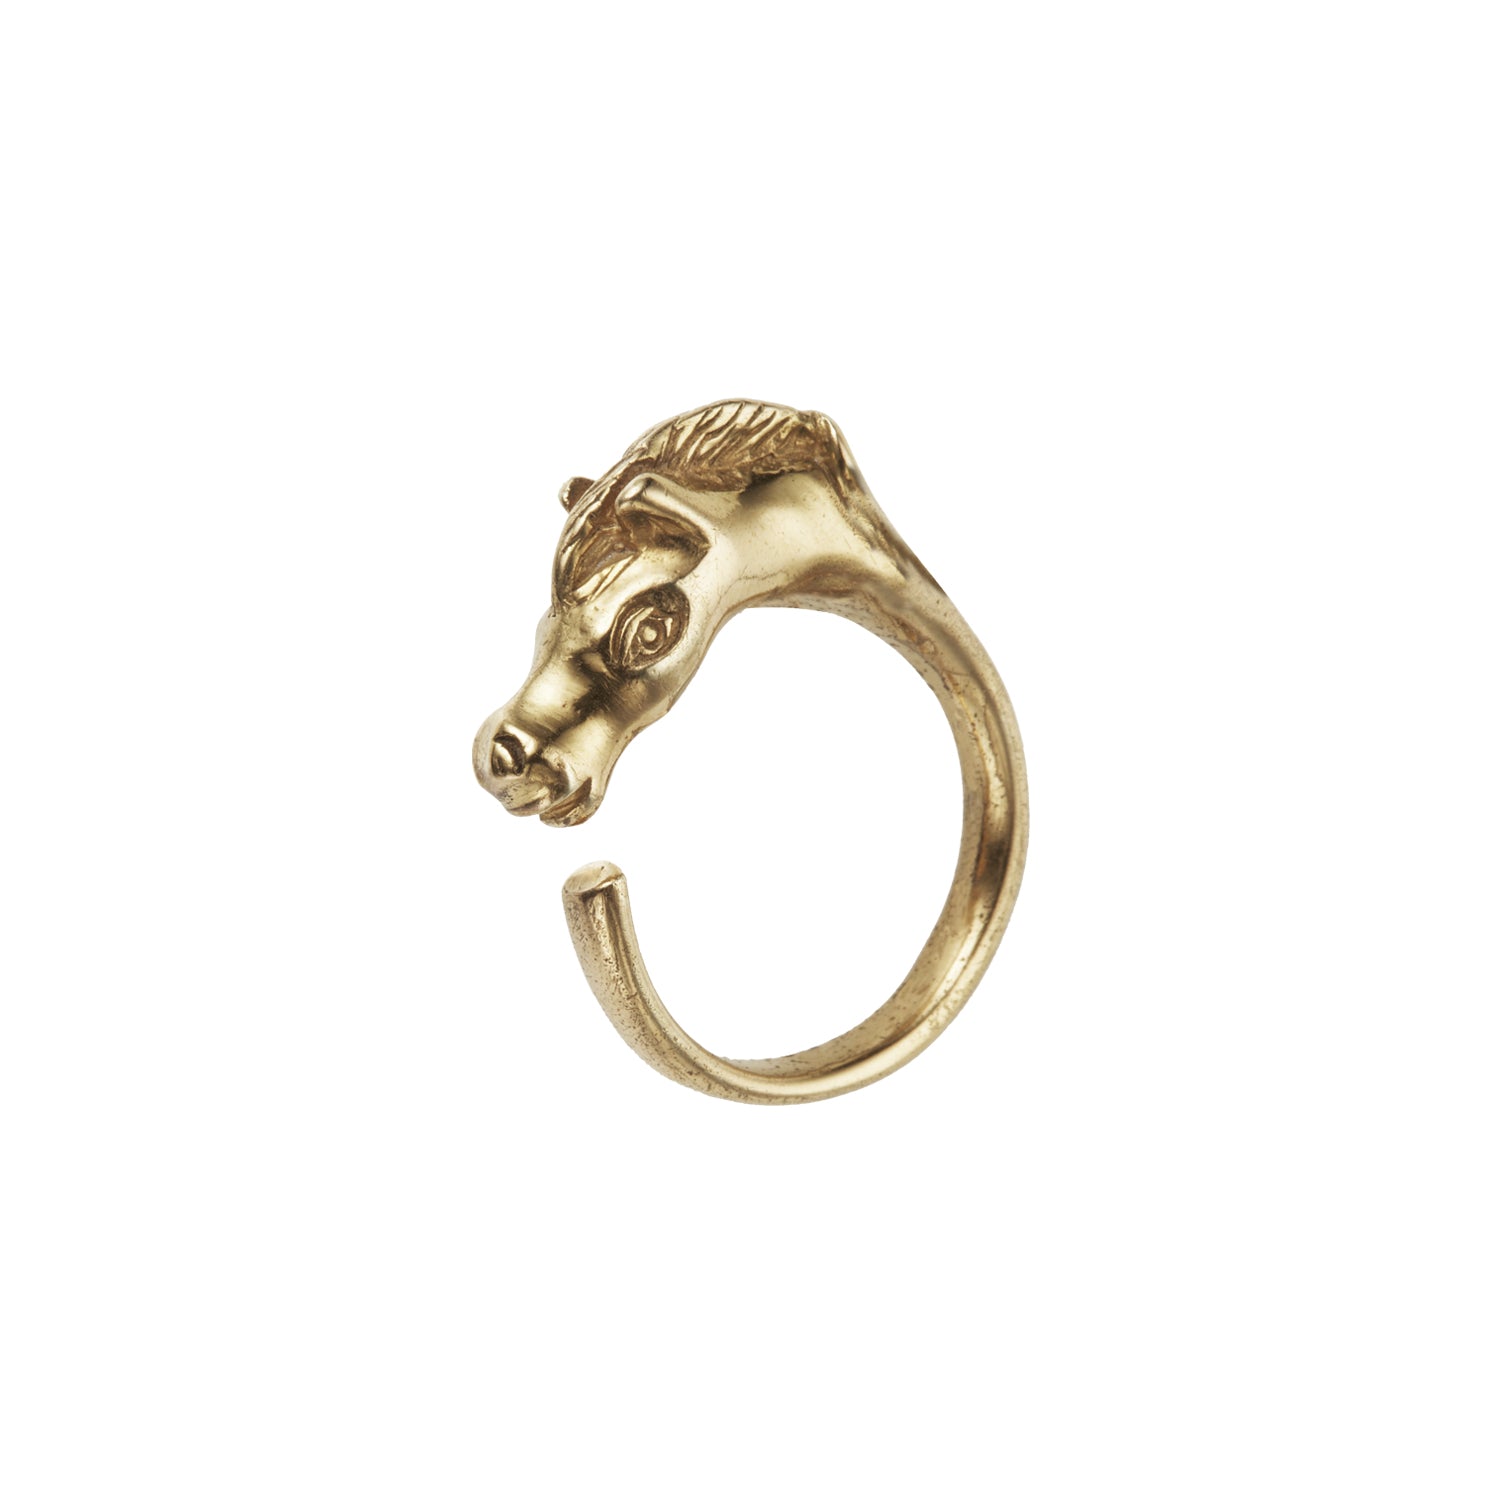 G&F Co.- HORSE RING _ SILVER 925 & 18 GOLD COATING